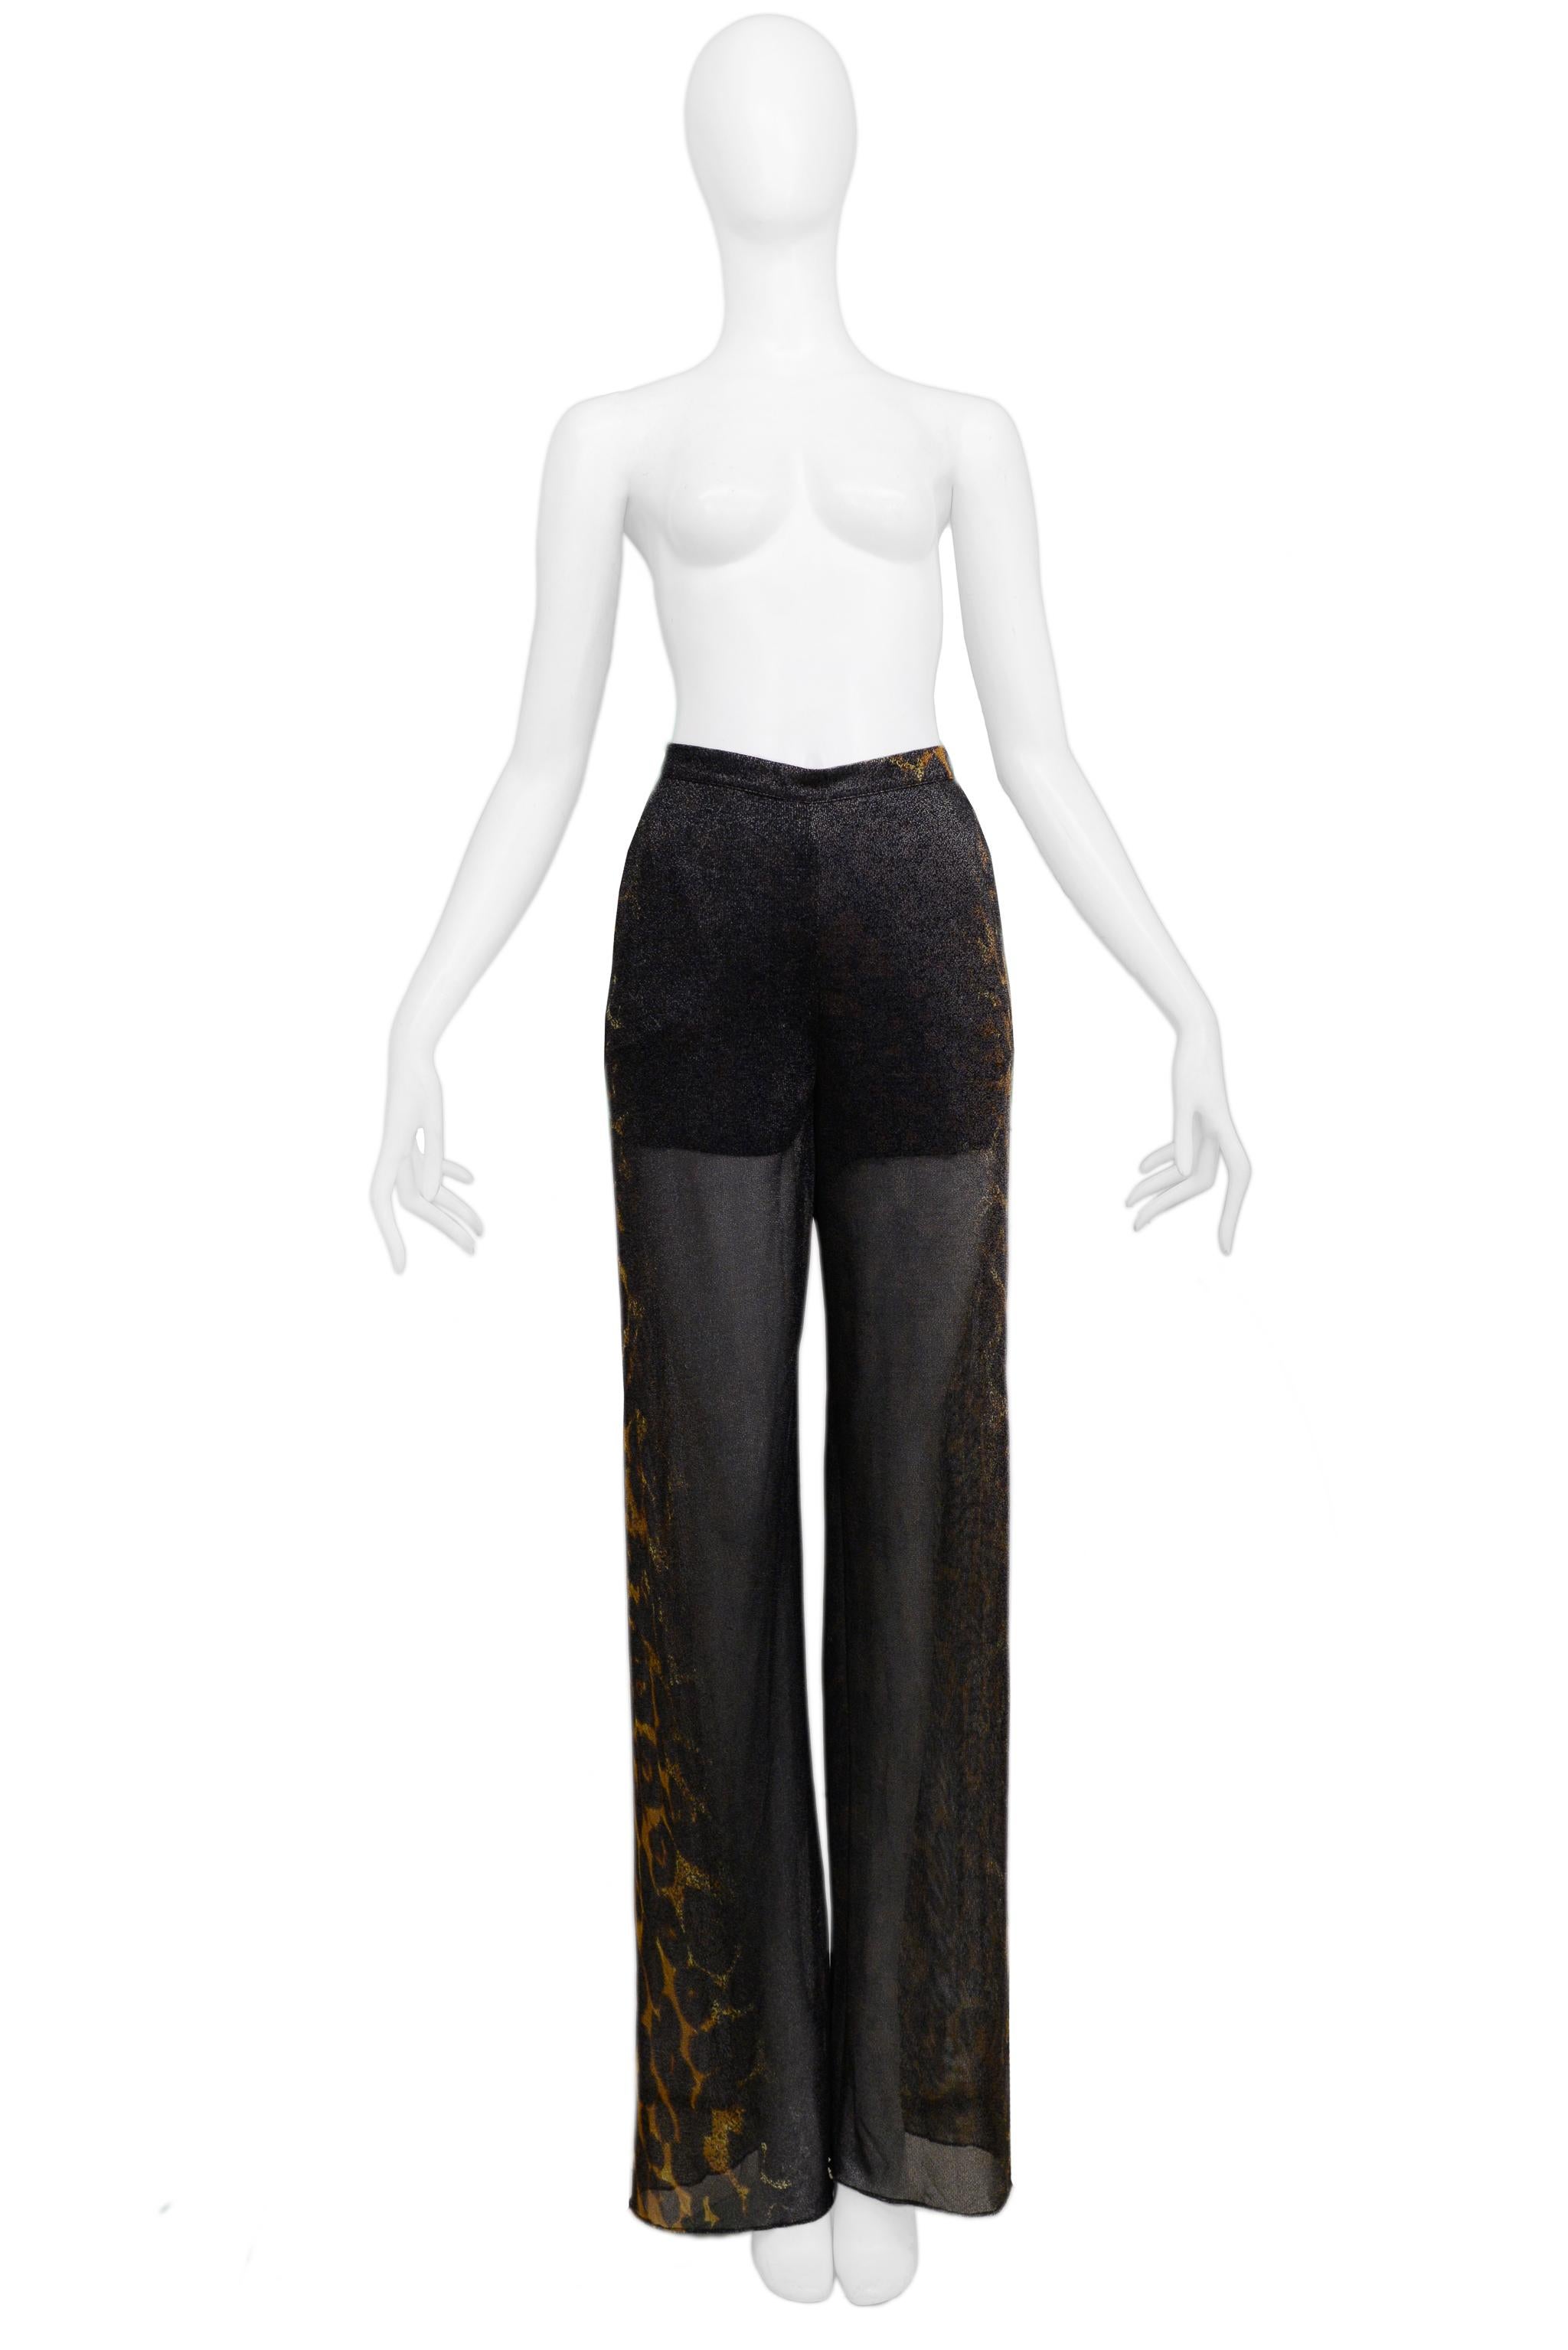 Resurrection Vintage is excited to offer a pair of vintage Gianfranco Ferre black sheer high-waisted pants featuring leopard print, interior shorts, center back zipper, and full legs. 

Gianfranco Ferre
Size About 44
Silk, Rayon, and Nylon
Excellent